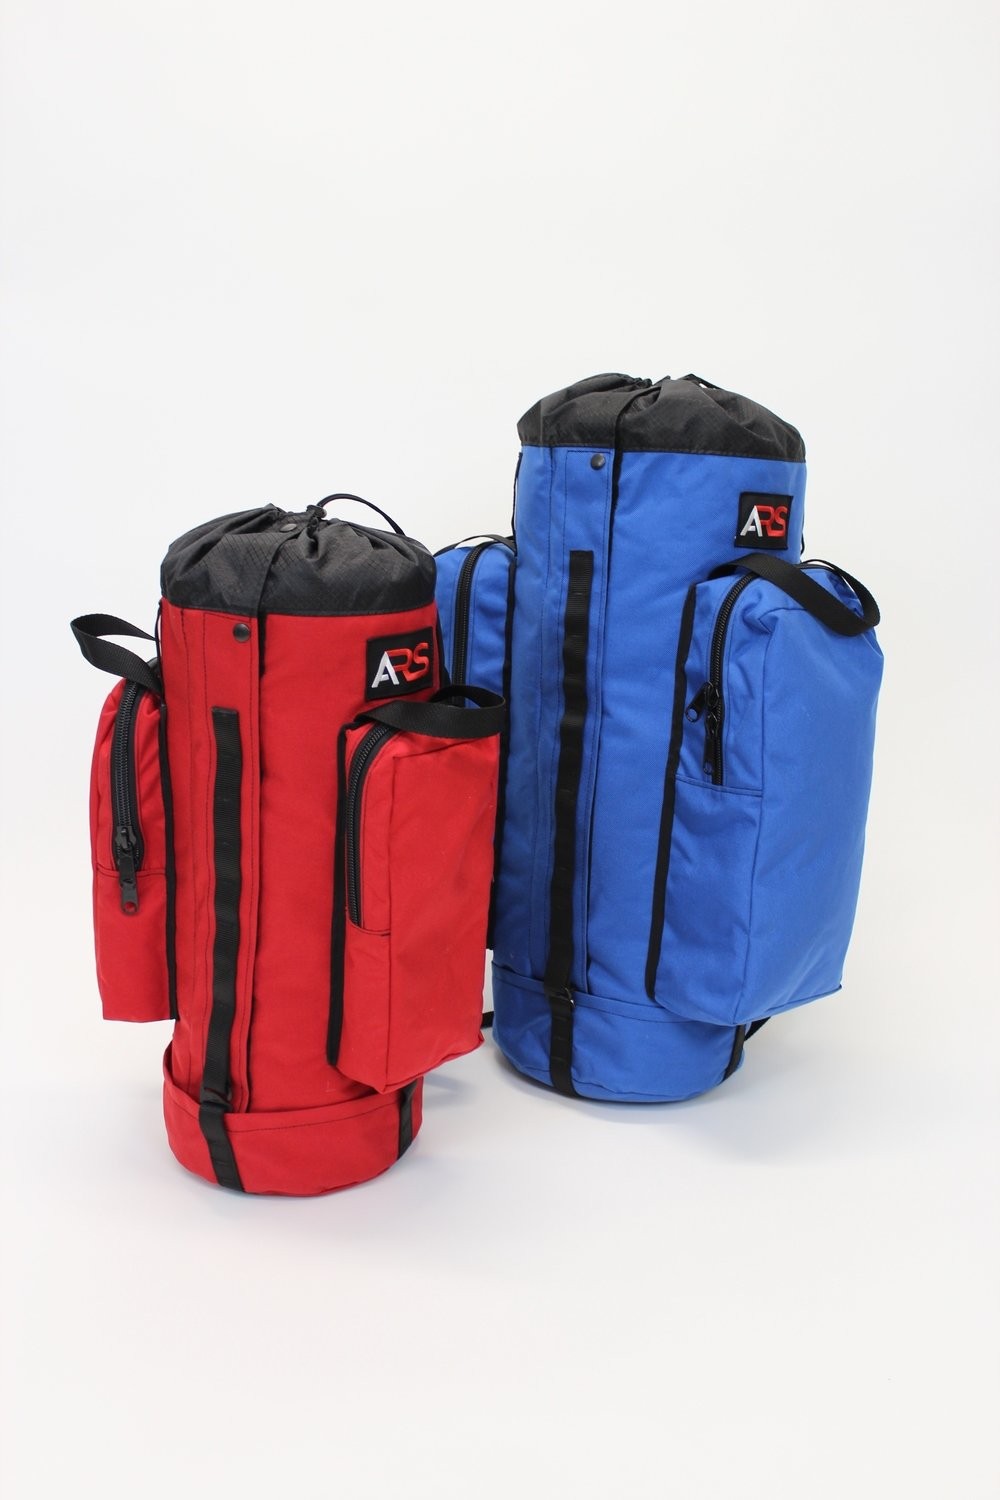 ARS Breakout Rope Bag with Pockets